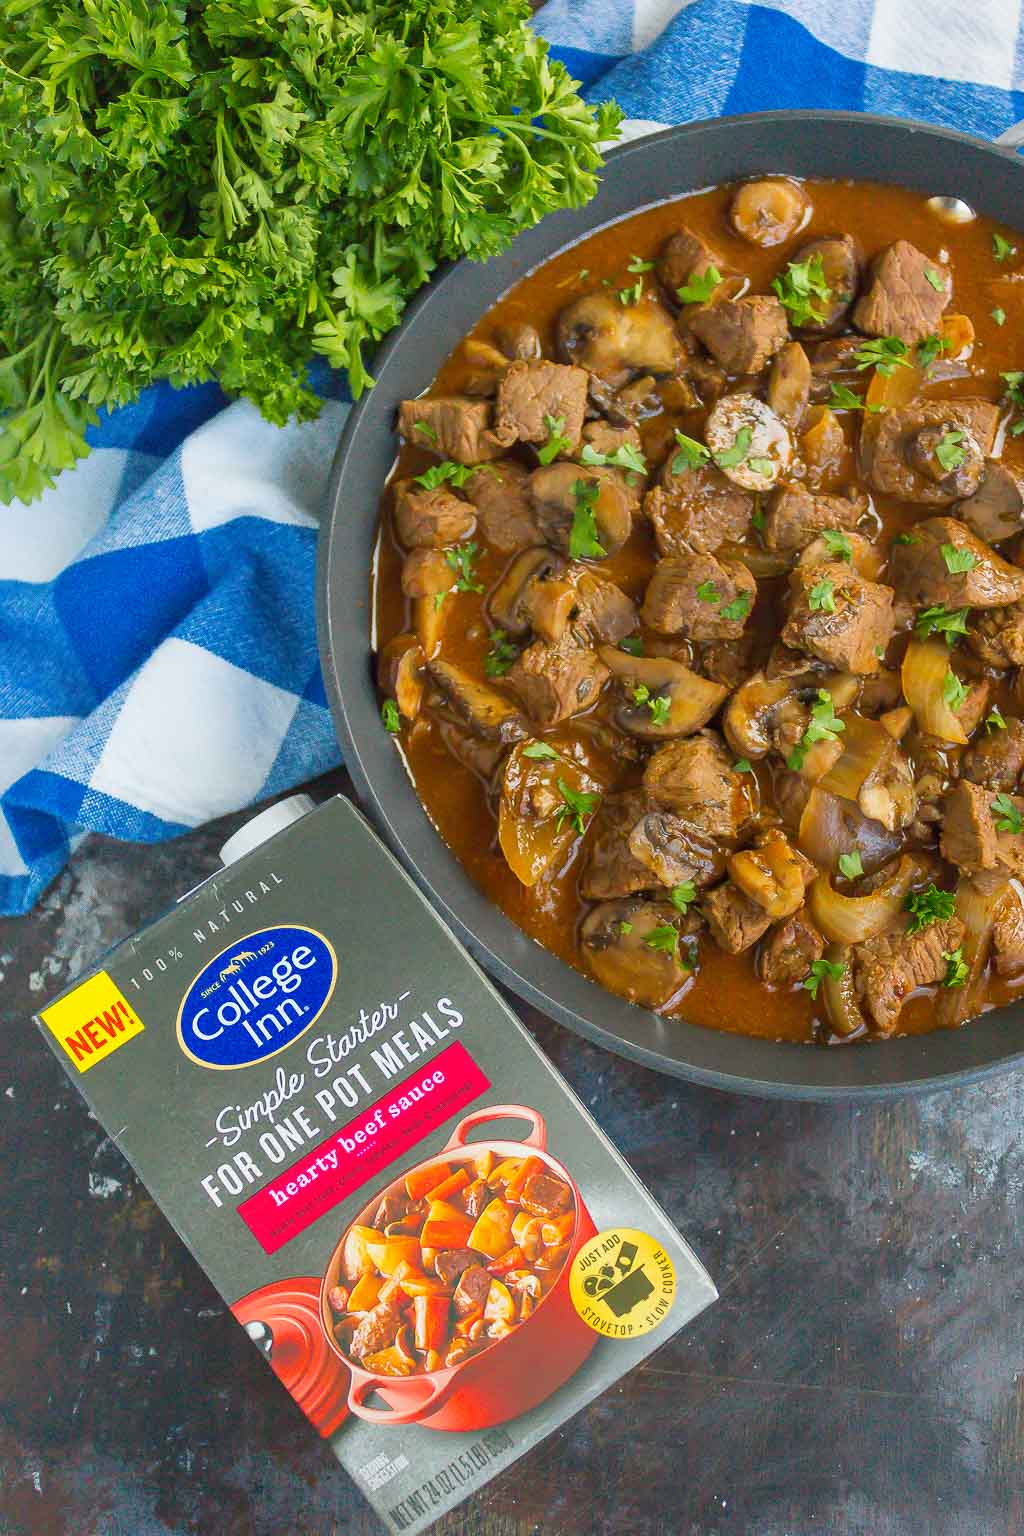 Beef Tips and Gravy make a simple, one pan meal that's ready in just 30 minutes. Tender beef tips are smothered in an easy and flavorful mushroom gravy. Serve on top of noodles or mashed potatoes for a deliciously hearty meal!